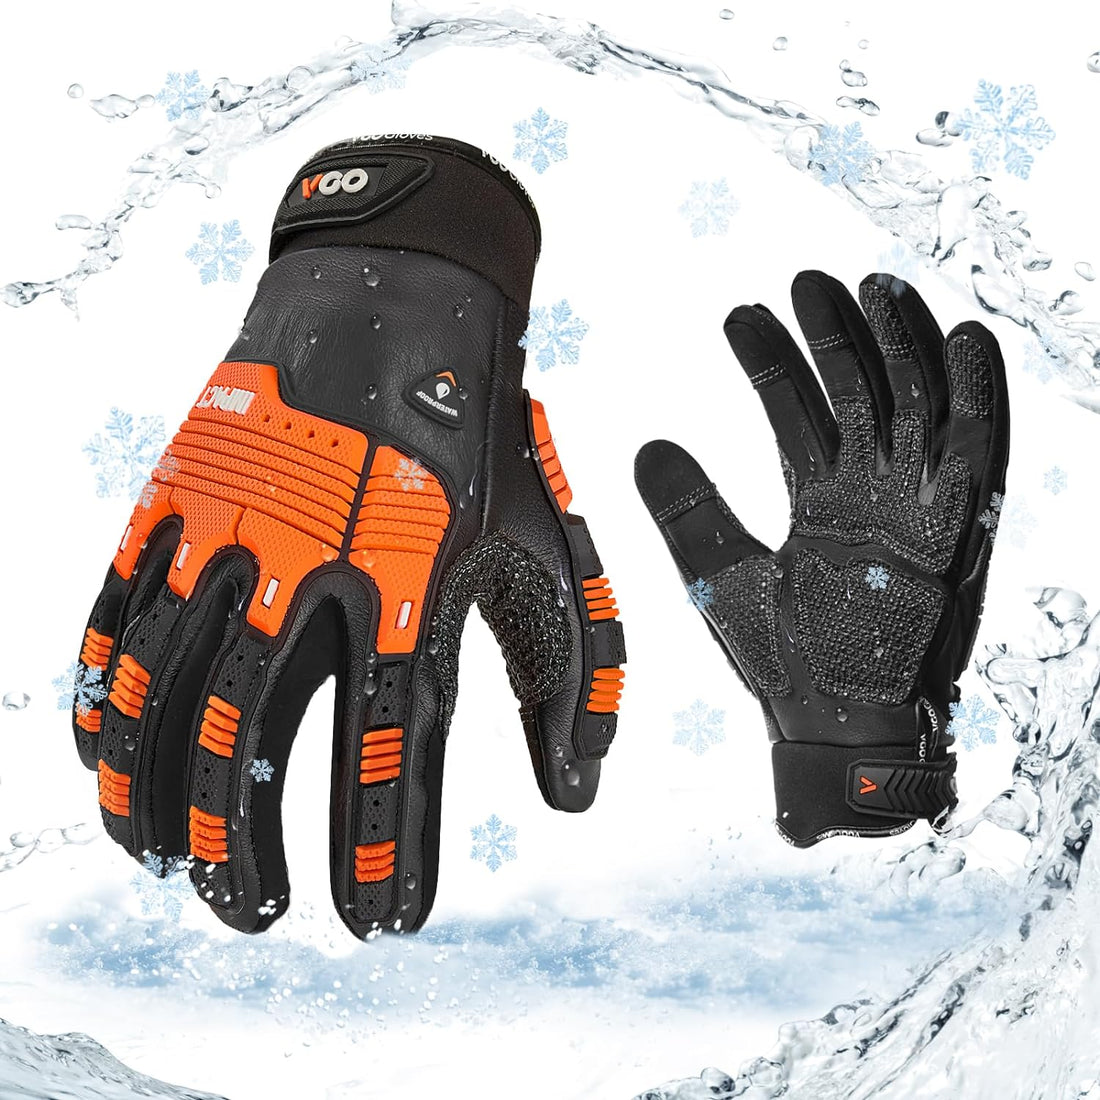 Vgo... -20℃/-4°F COLDPROOF,Winter Work Leather Gloves,Mechanics Gloves,Impact Gloves,Anti-Vibration Gloves,Heavy Duty,Water Resistant(Size XL,Black,CA7722FLWP)